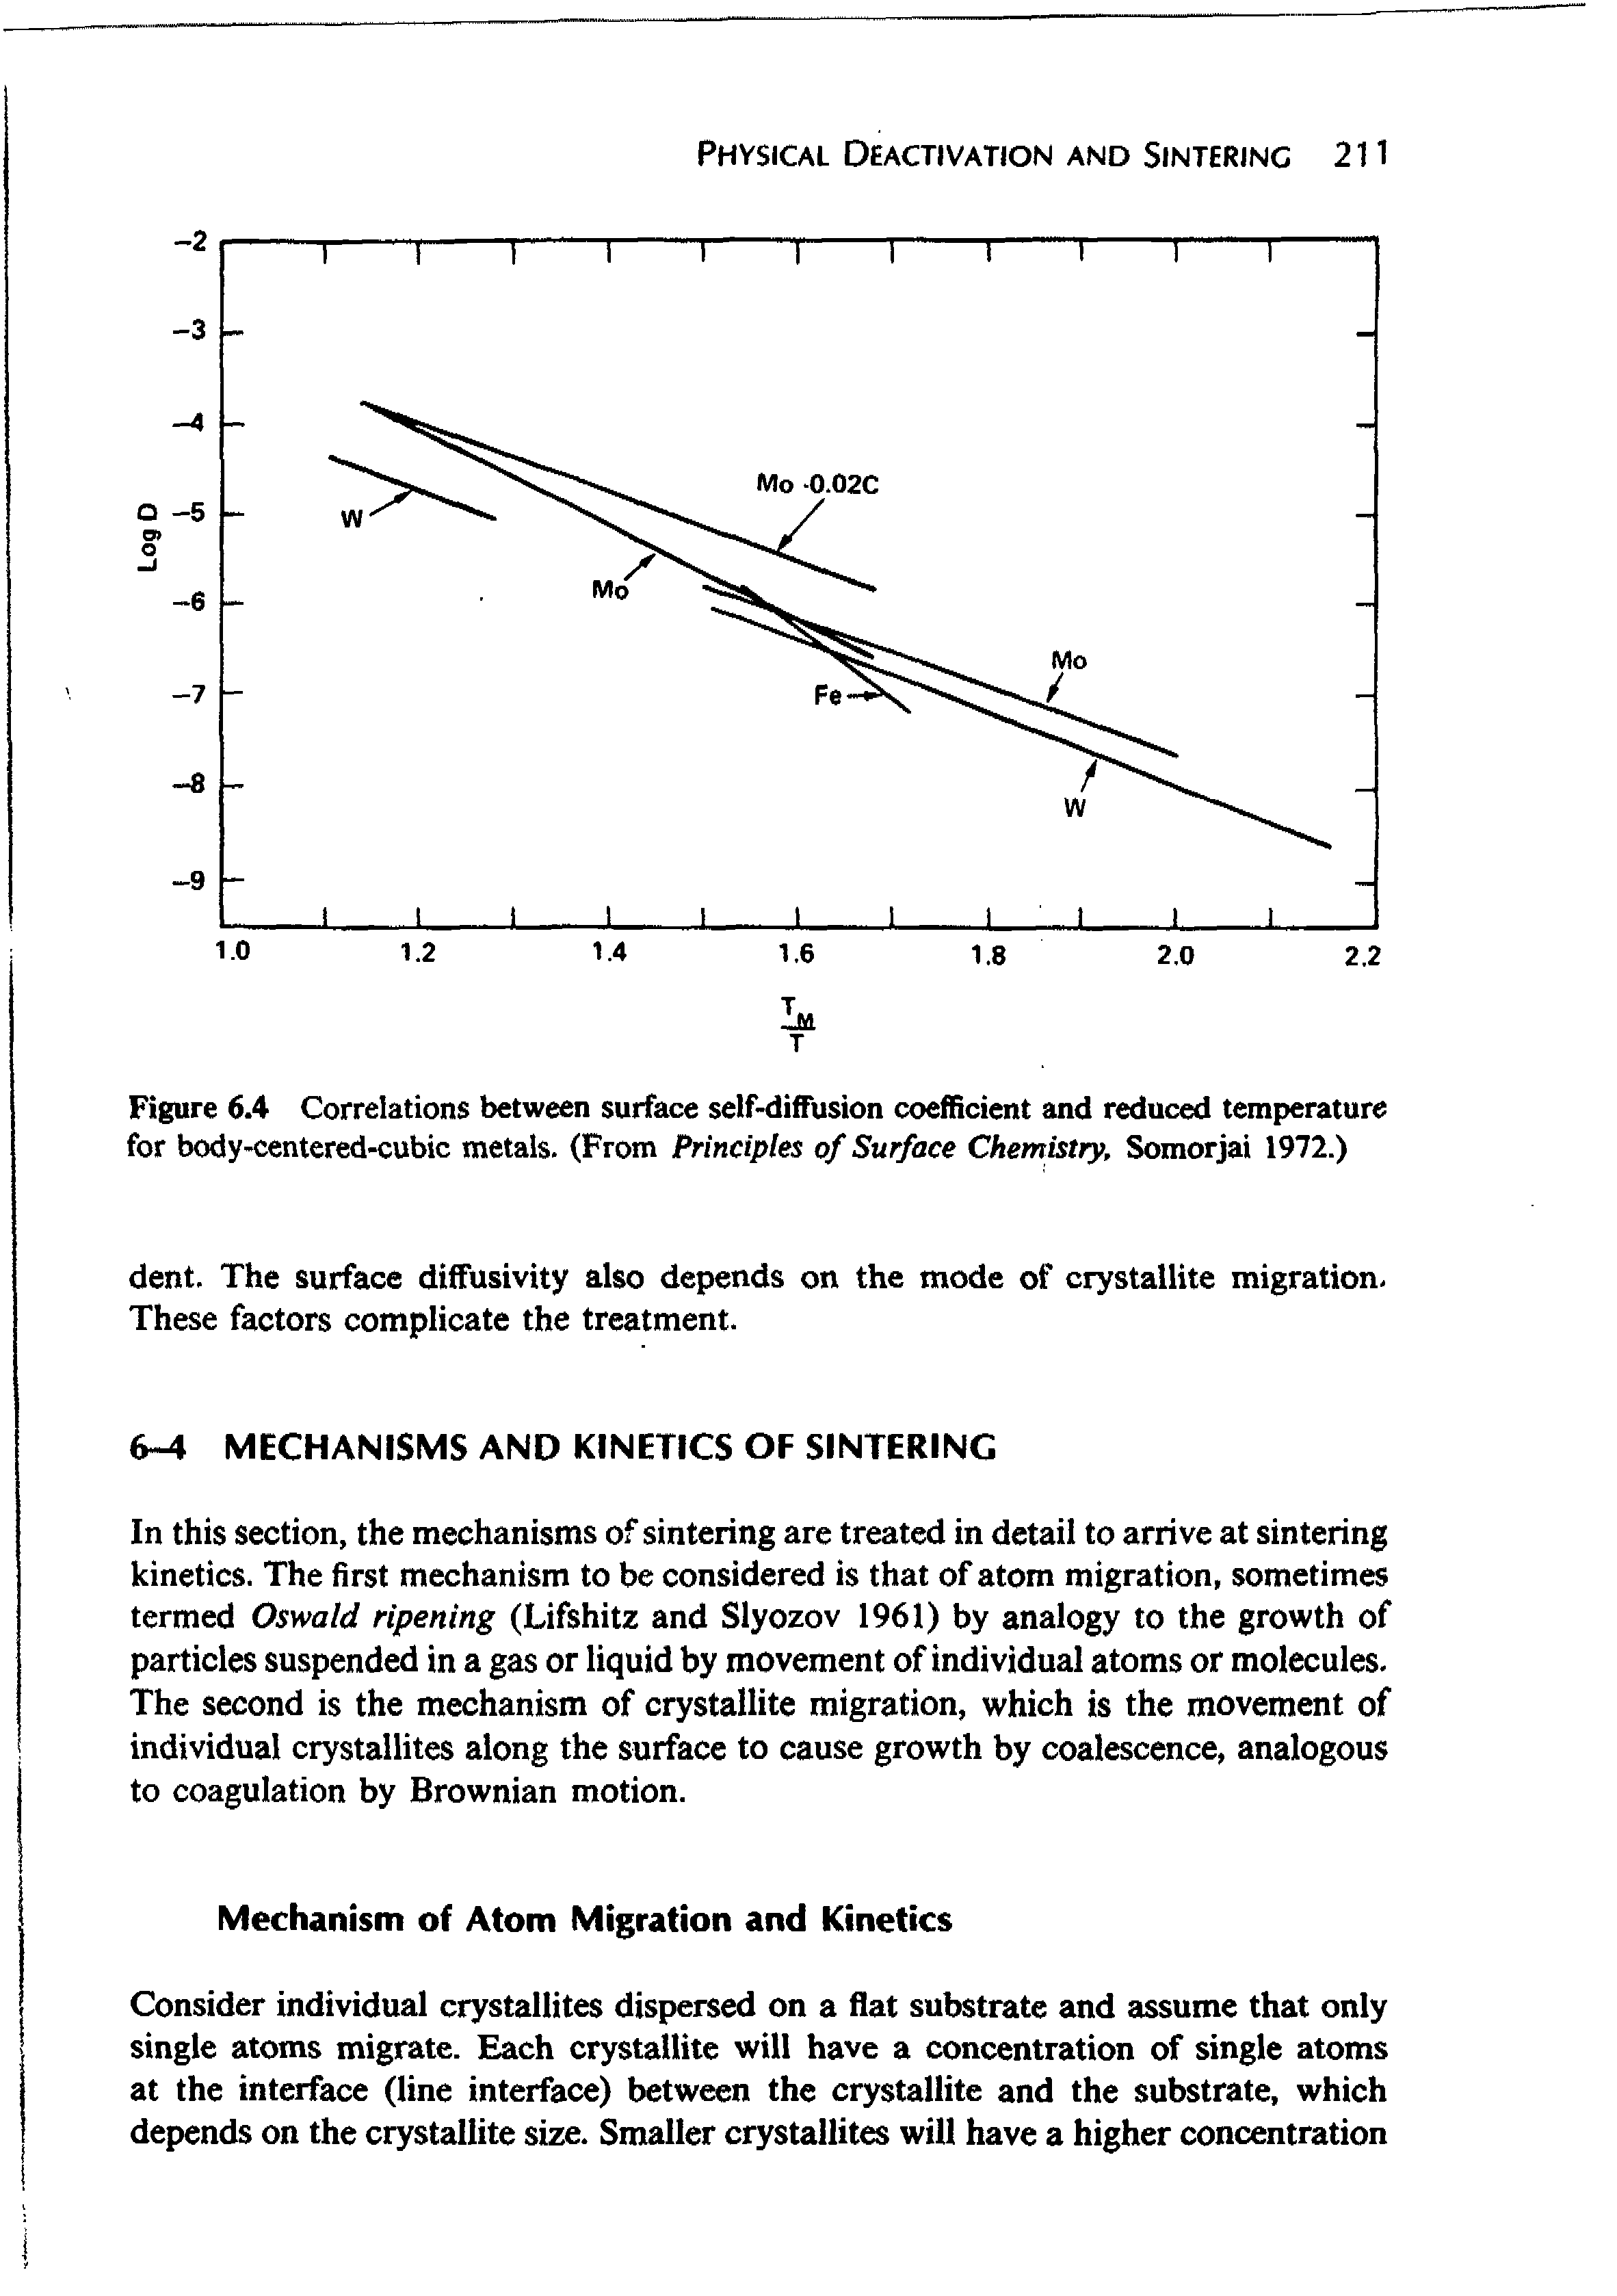 Figure 6.4 Correlations between surface self-diffusion coefficient and reduced temperature for body-centered-cubic metals. (From Principles of Surface Chemistry, Somorjai 1972.)...